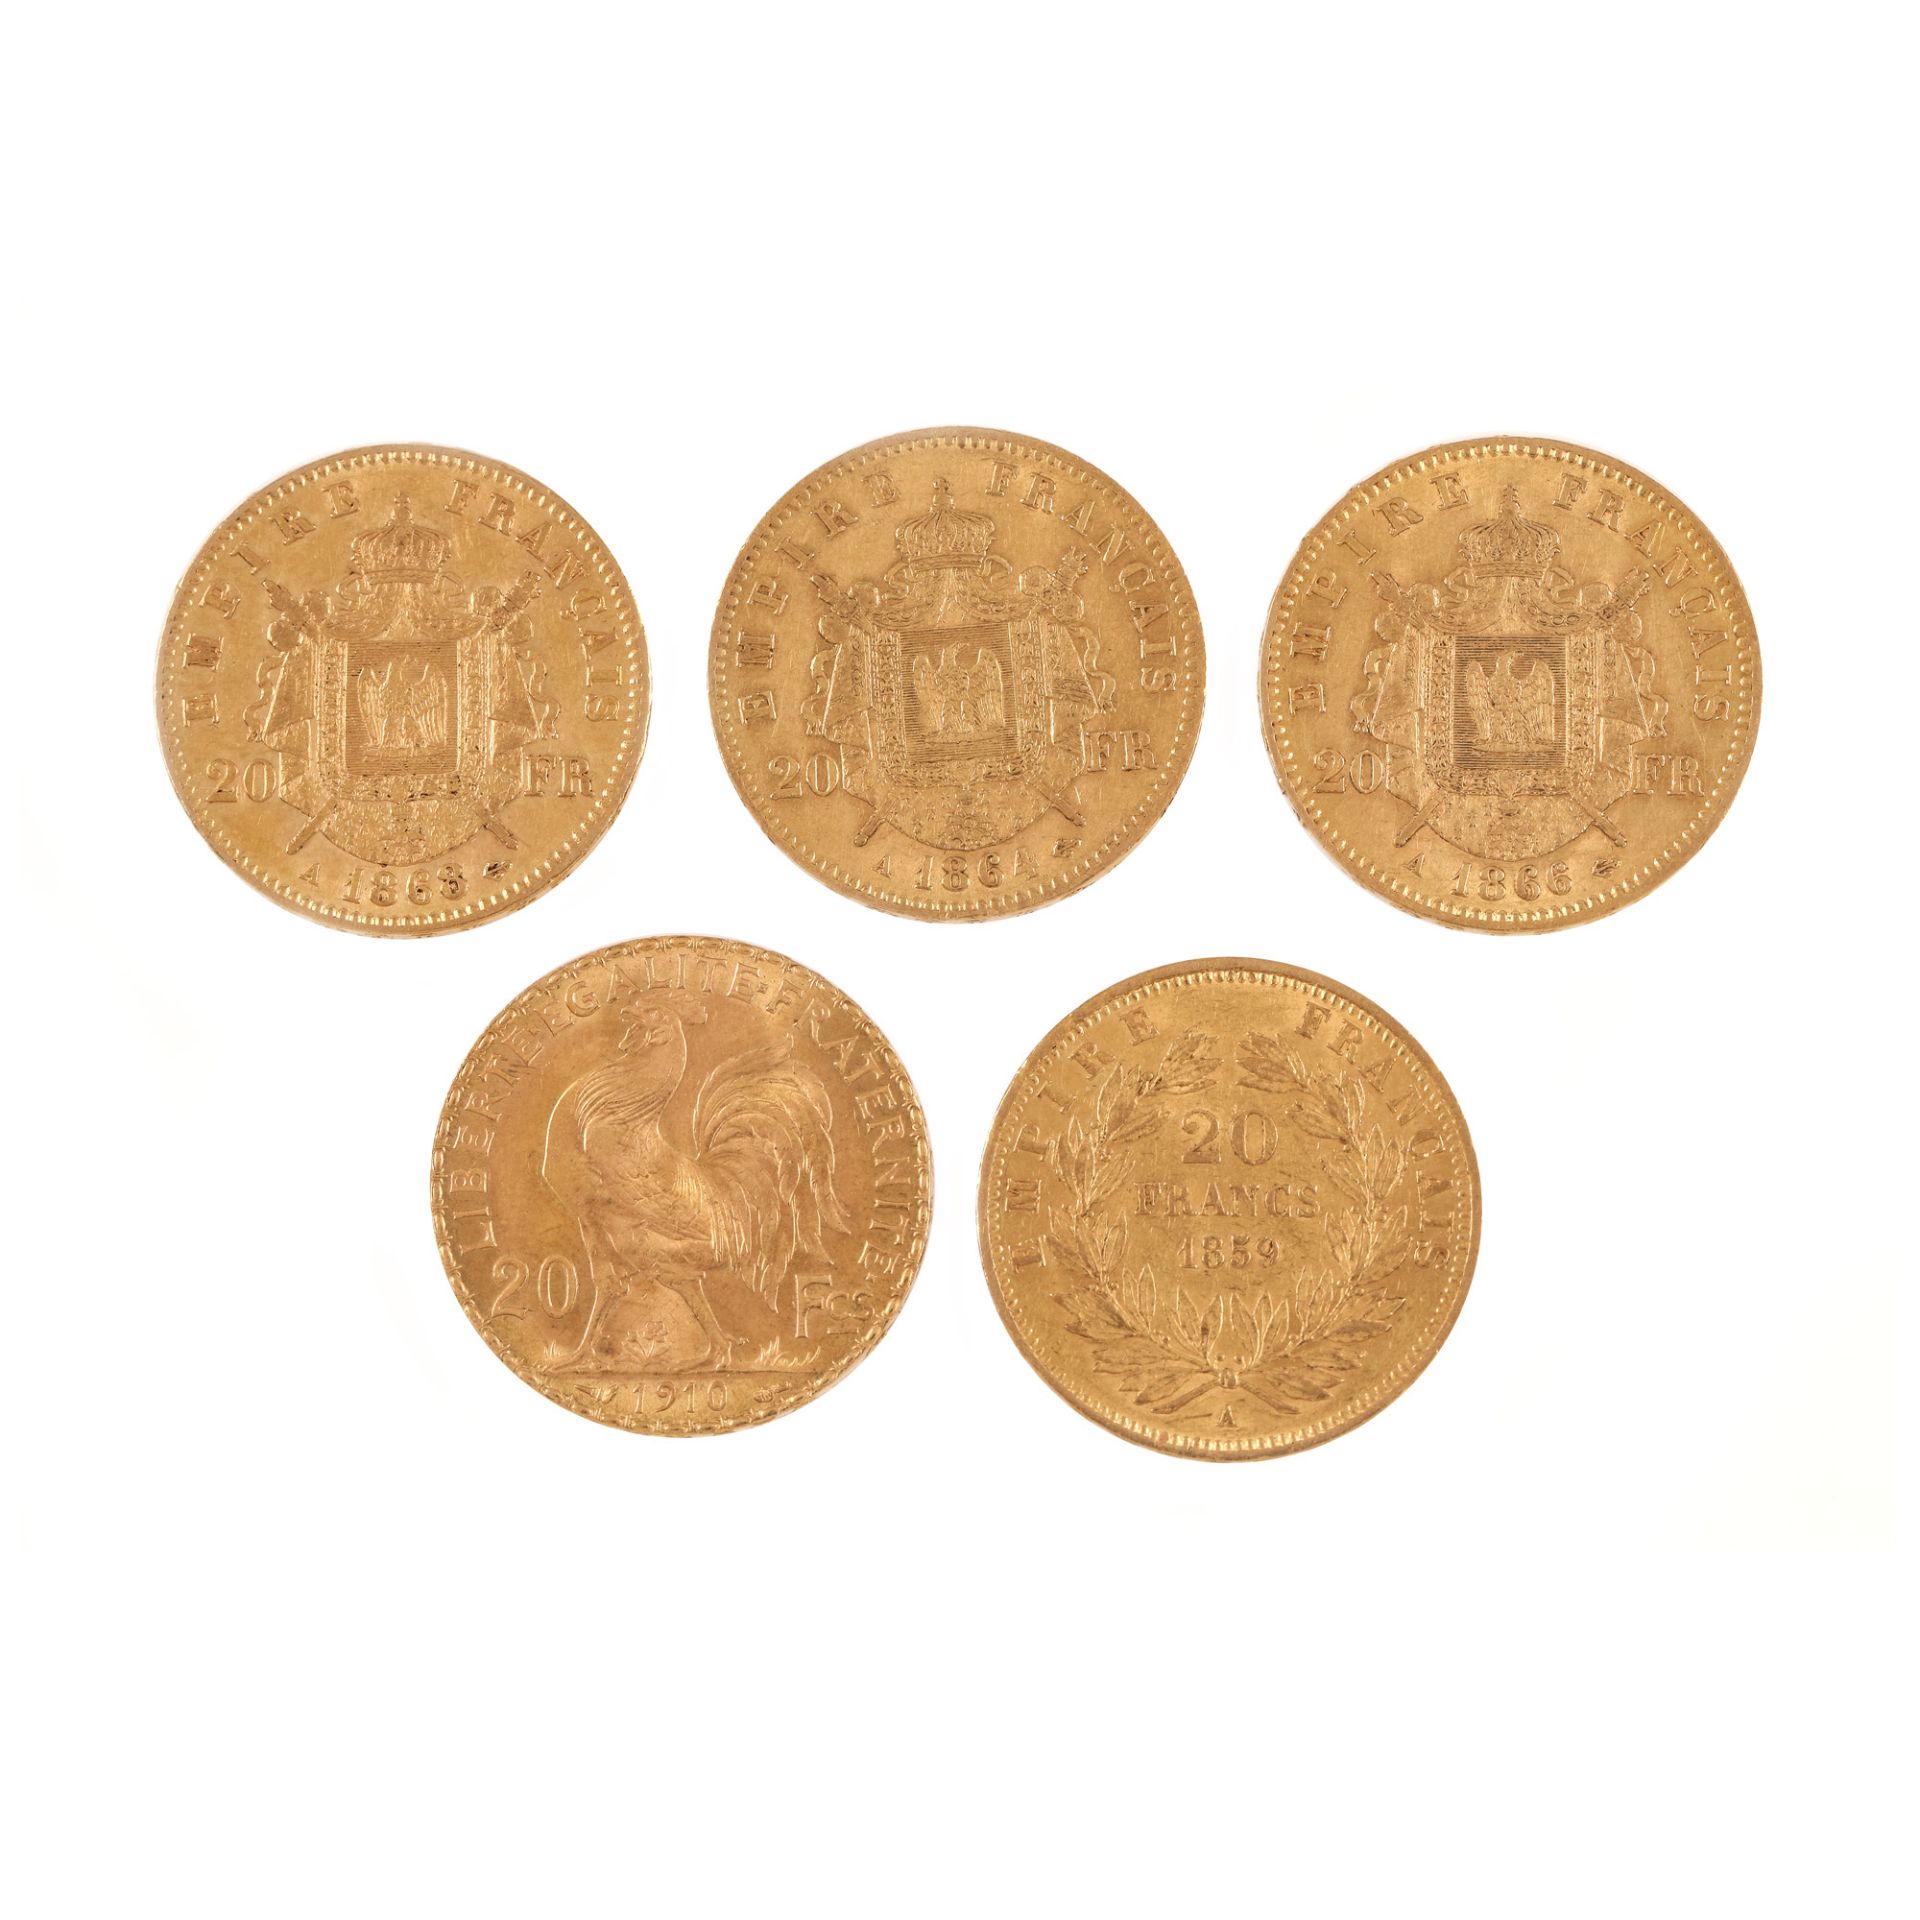 5 gold coins, 20 Francs, France, Empire and the 3rd Republic - Image 2 of 2